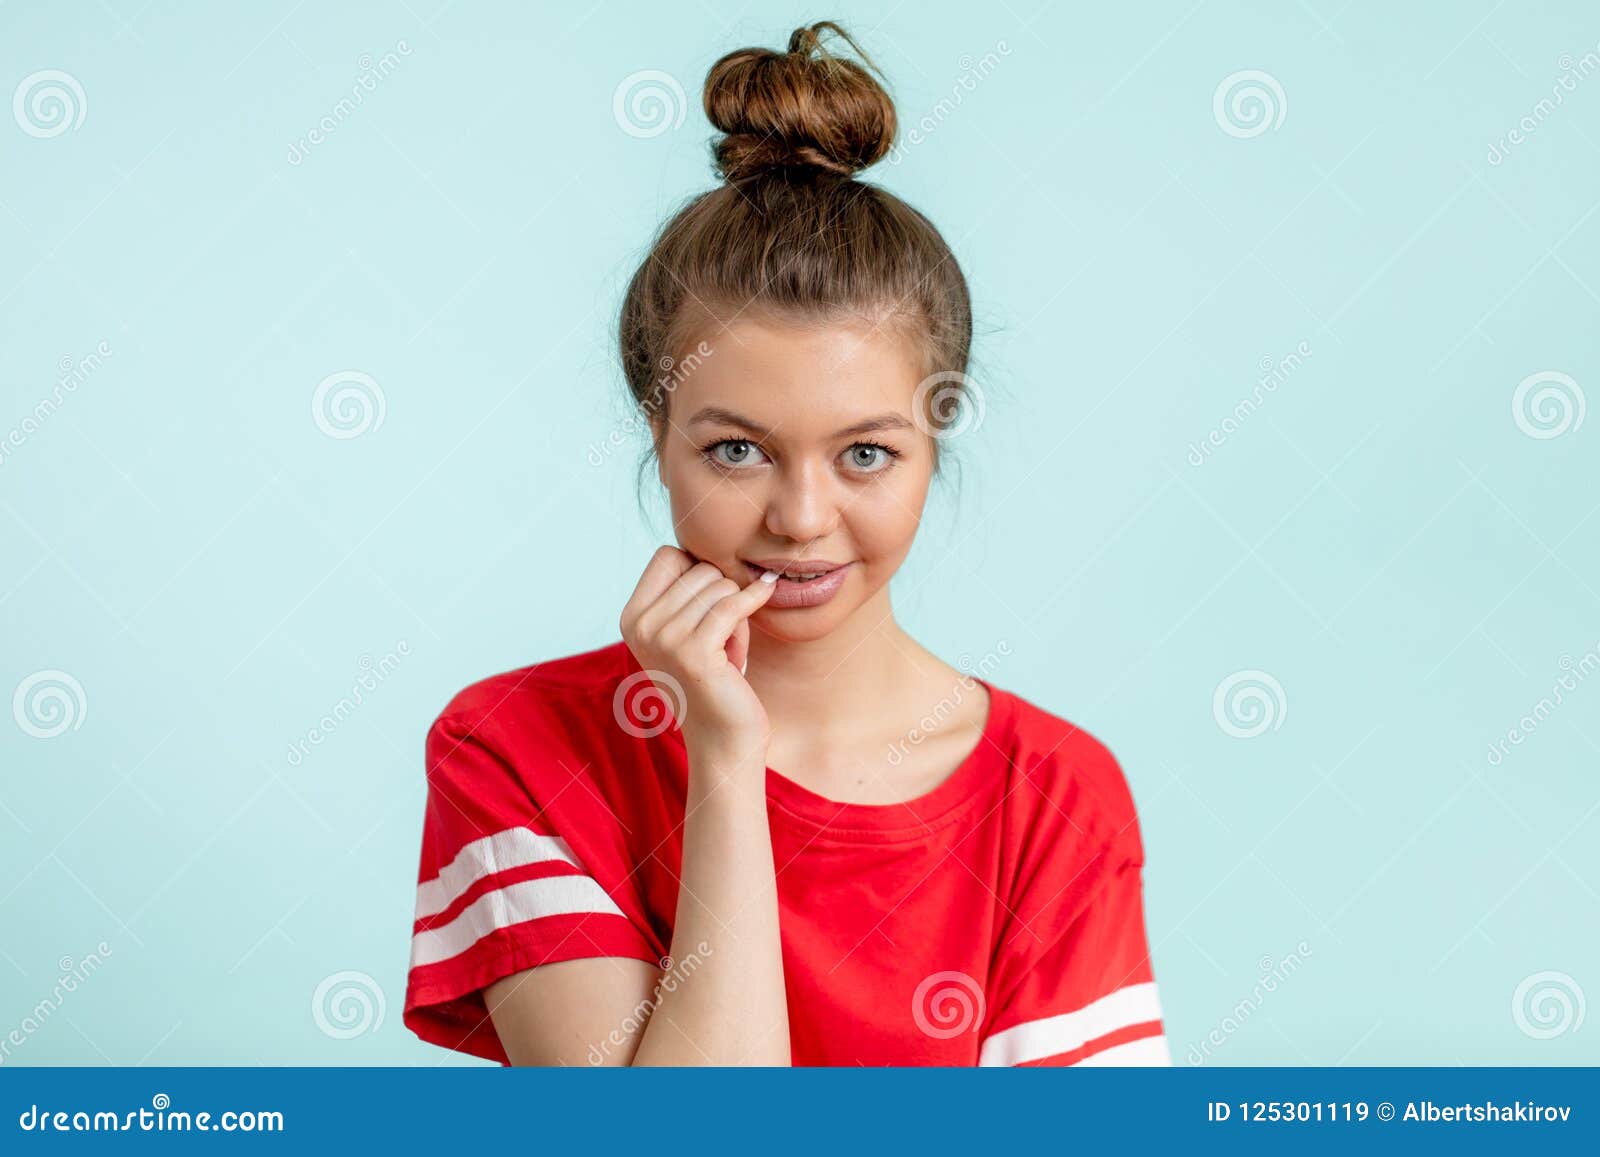 Pretty Young Girl Holding Her Finger on a Mouth and Looking at the ...